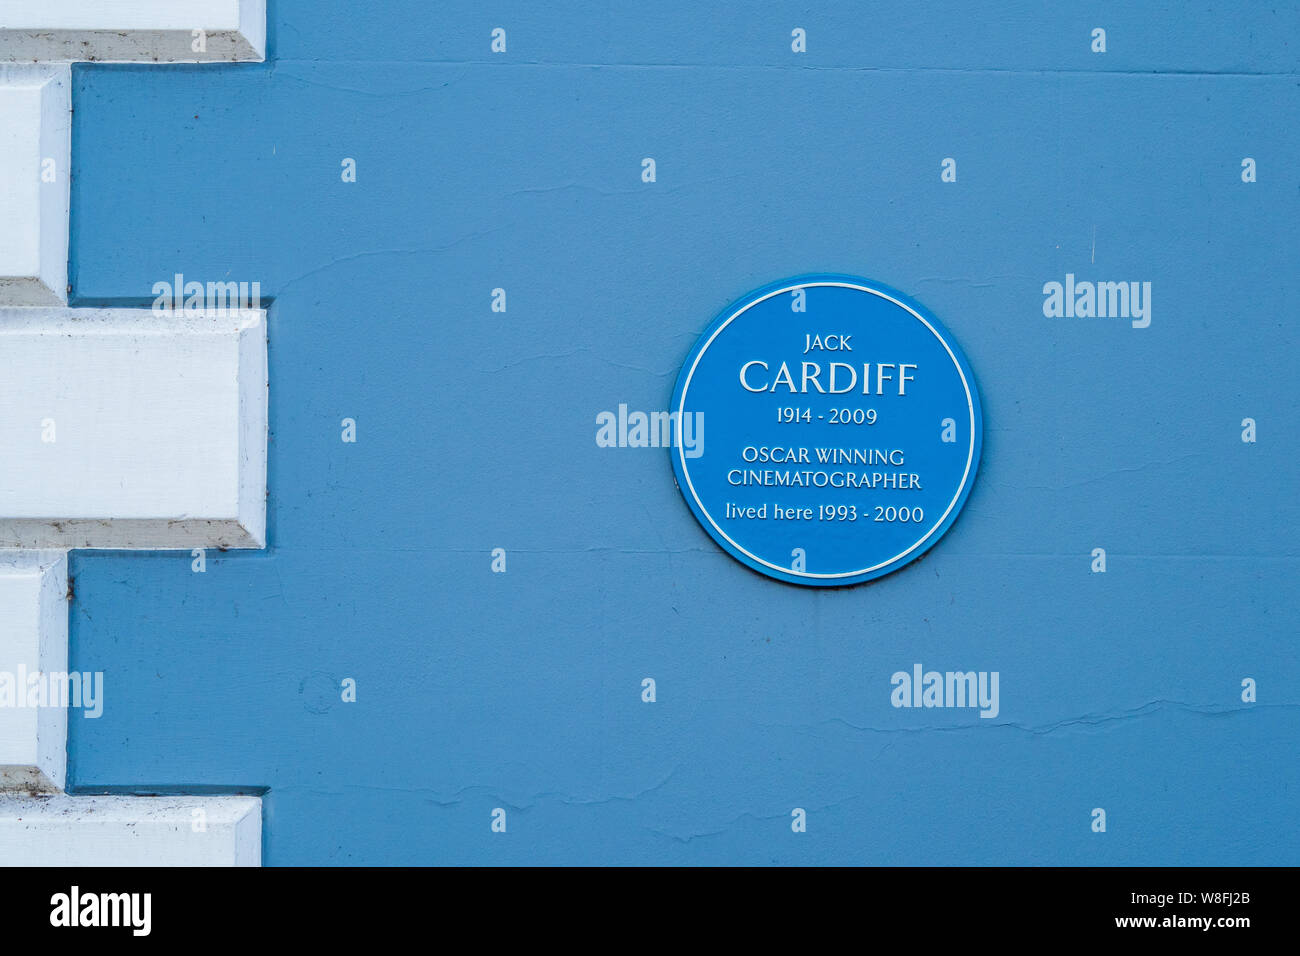 Jack Cardiff Cinematographer Saffron Walden. Blue plaque on the house that Jack Cardiff, Oscar winning cinematographer, lived in between 1993 and 2000. Stock Photo